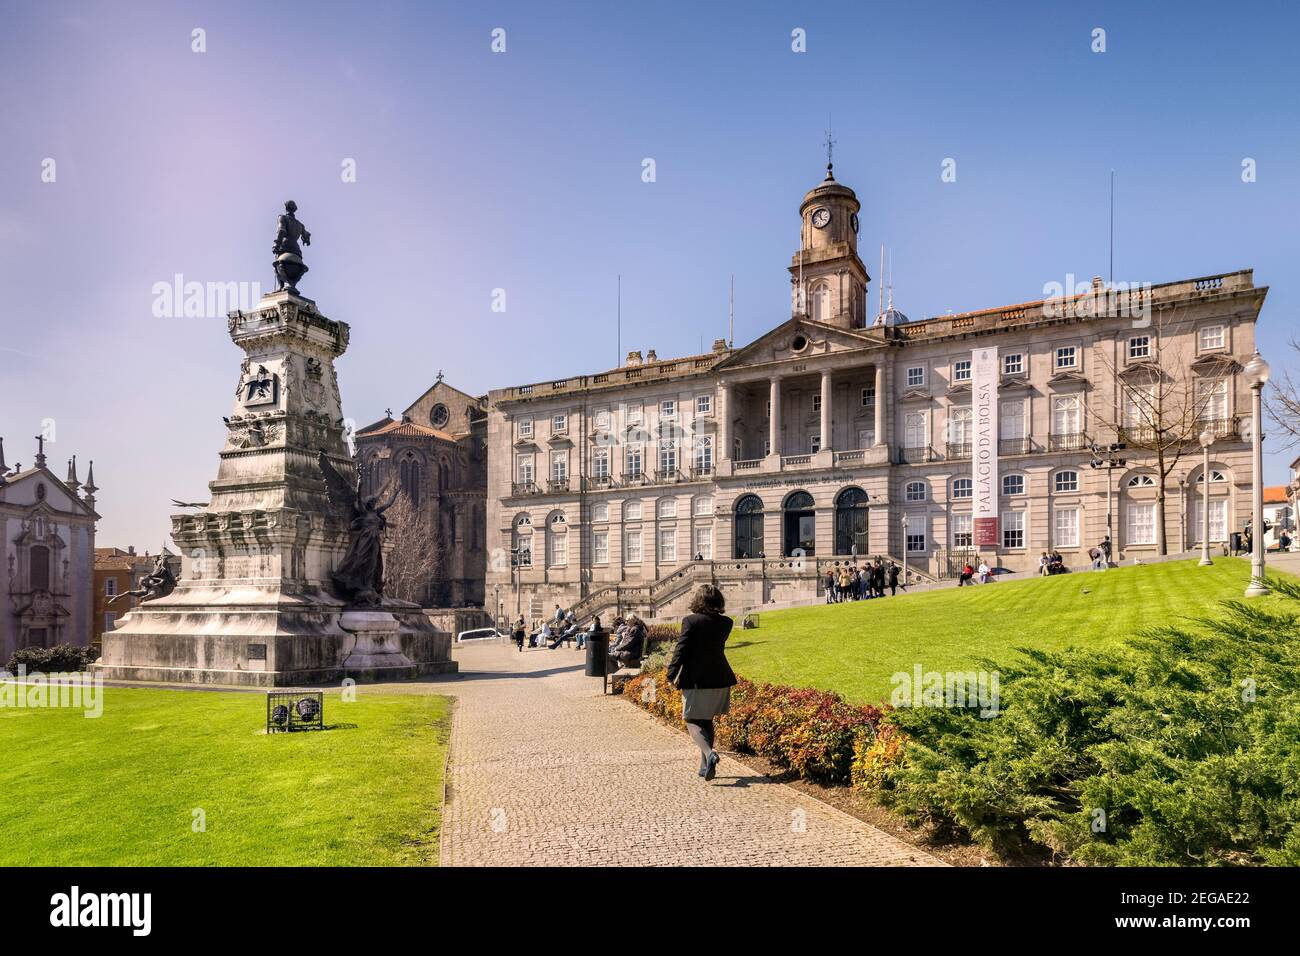 10 March 2020: Porto, Portugal - Praca Infante Dom Henrique or Prince Henry the Navigator Place in Porto, with the Bolsa Palace, the former Stock Exch Stock Photo